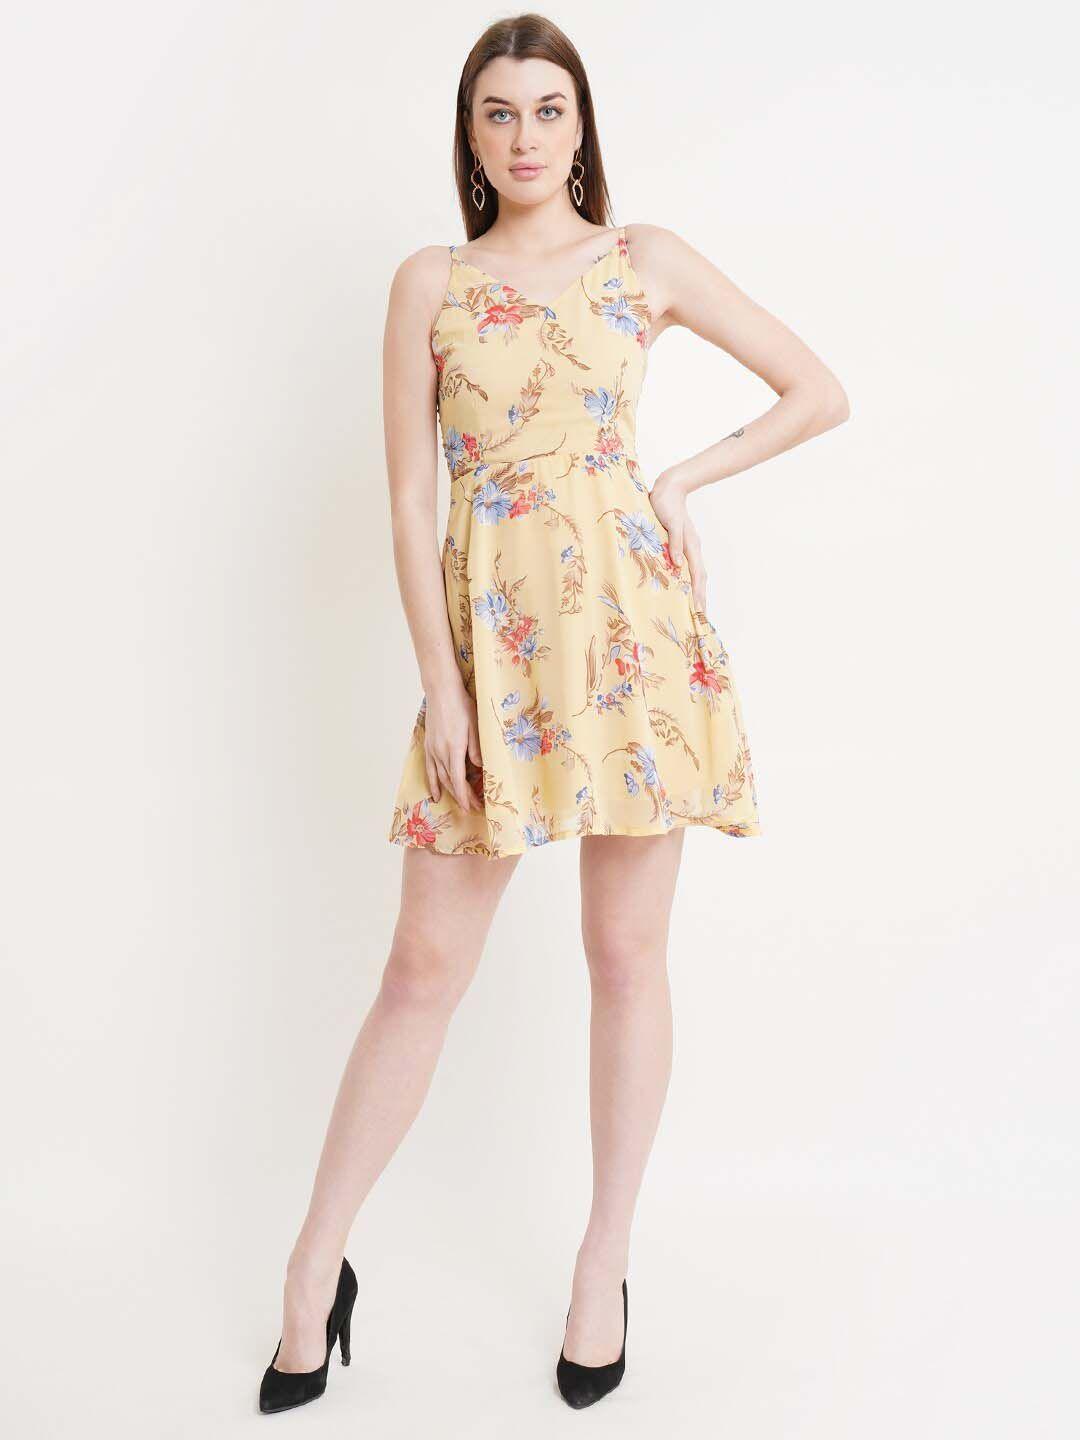 dodo & moa yellow & red floral sheath dress